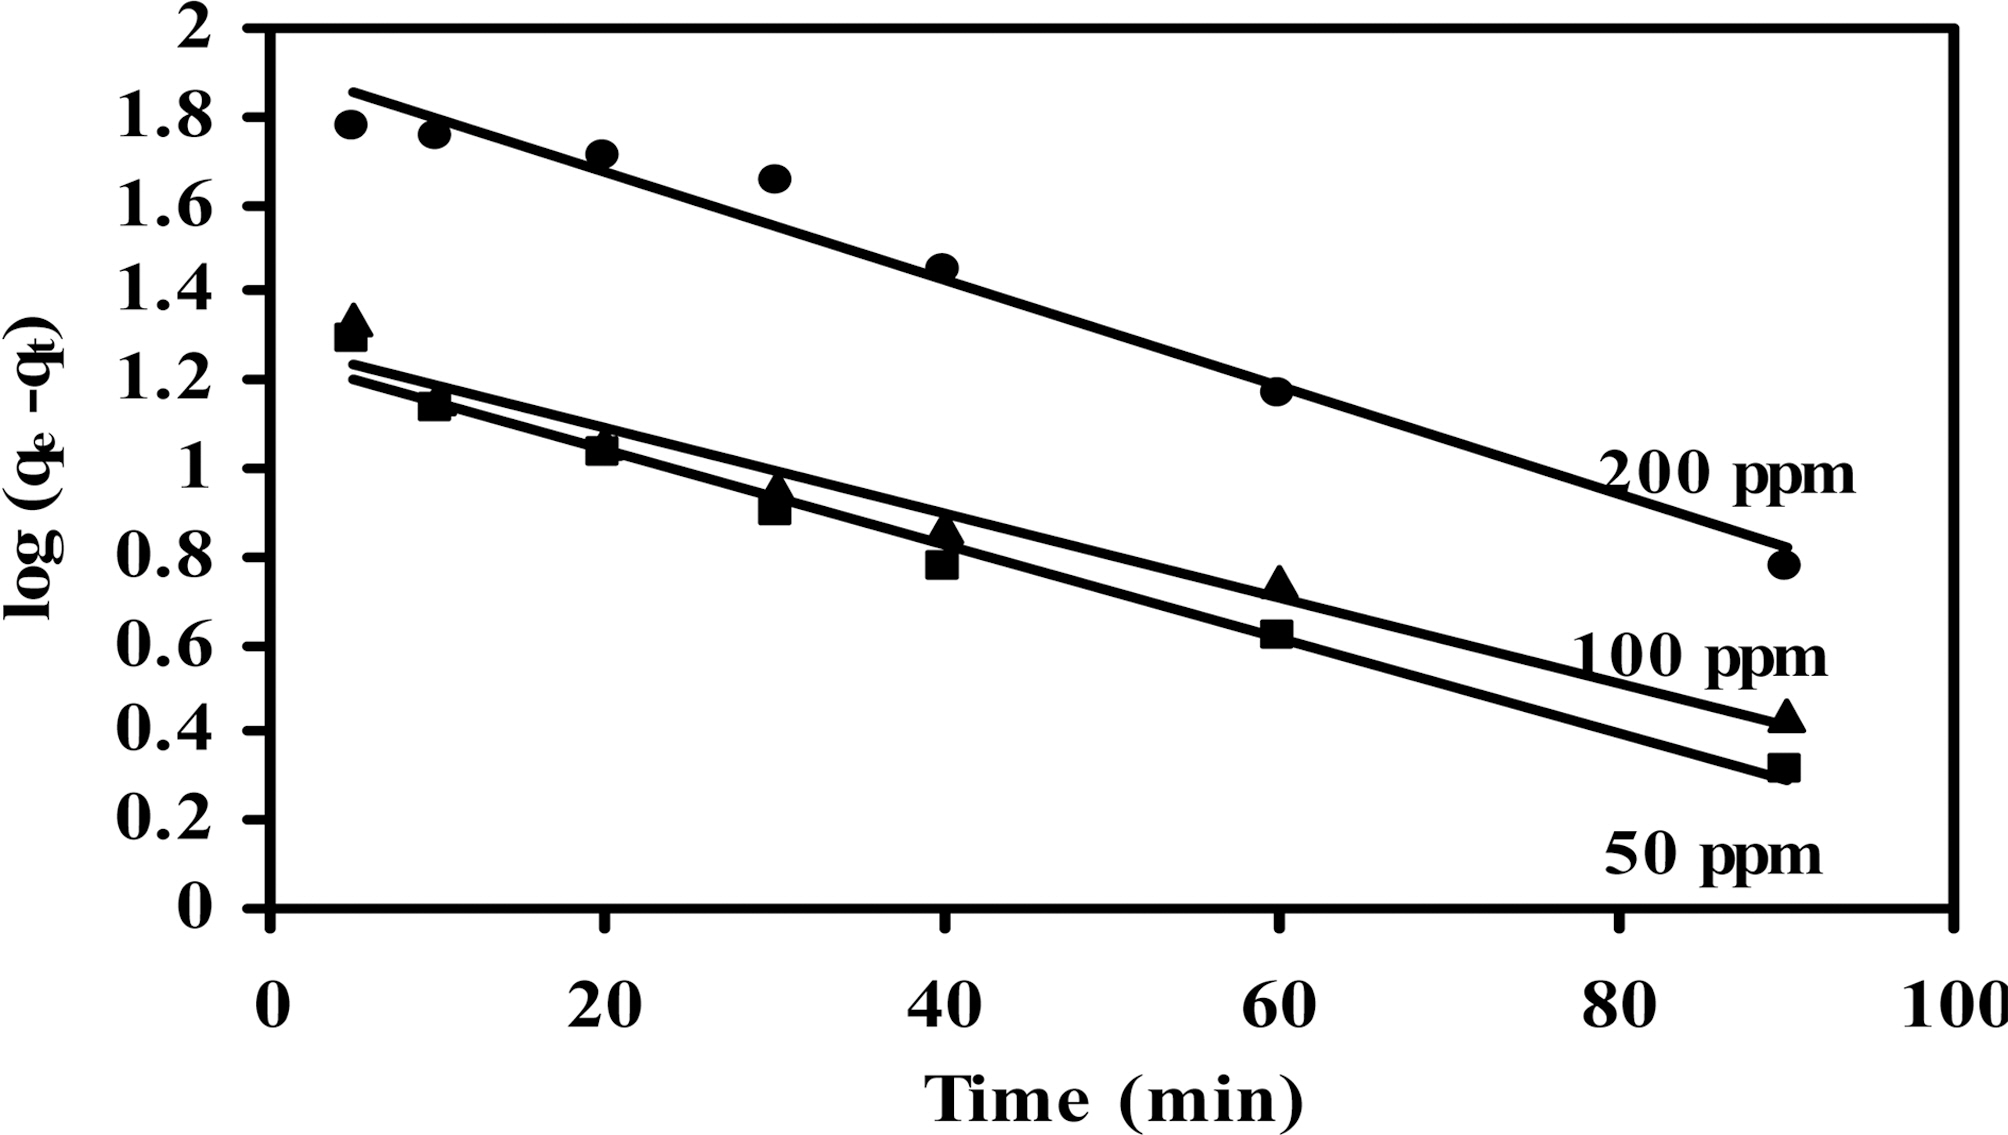 Pseudo-first-order kinetics for the adsorption of 200 ml MB dye onto 200 mg of CCS-1K750.